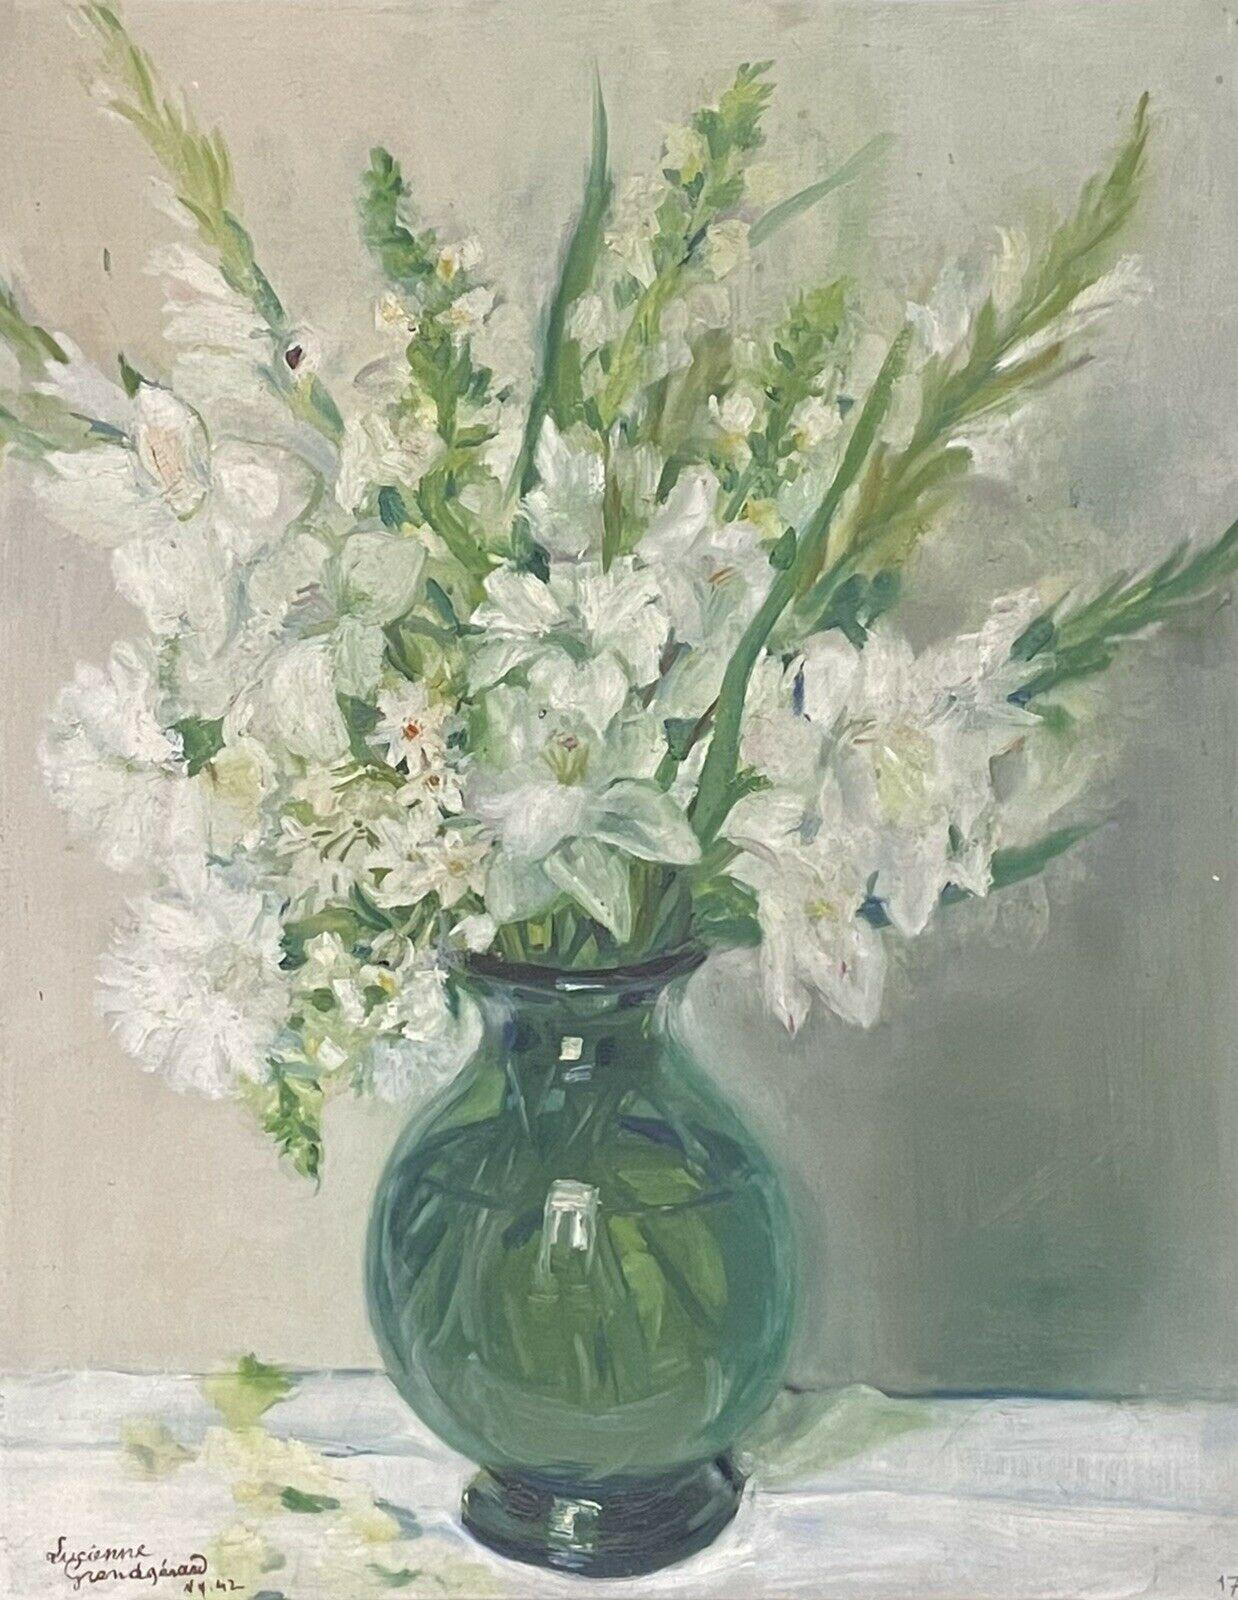 Lucienne Estival - Grandgerard Still-Life Painting - 1940's FRENCH SIGNED OIL PAINTING - WHITE FLOWERS IN GREEN GLASS VASE - LARGE